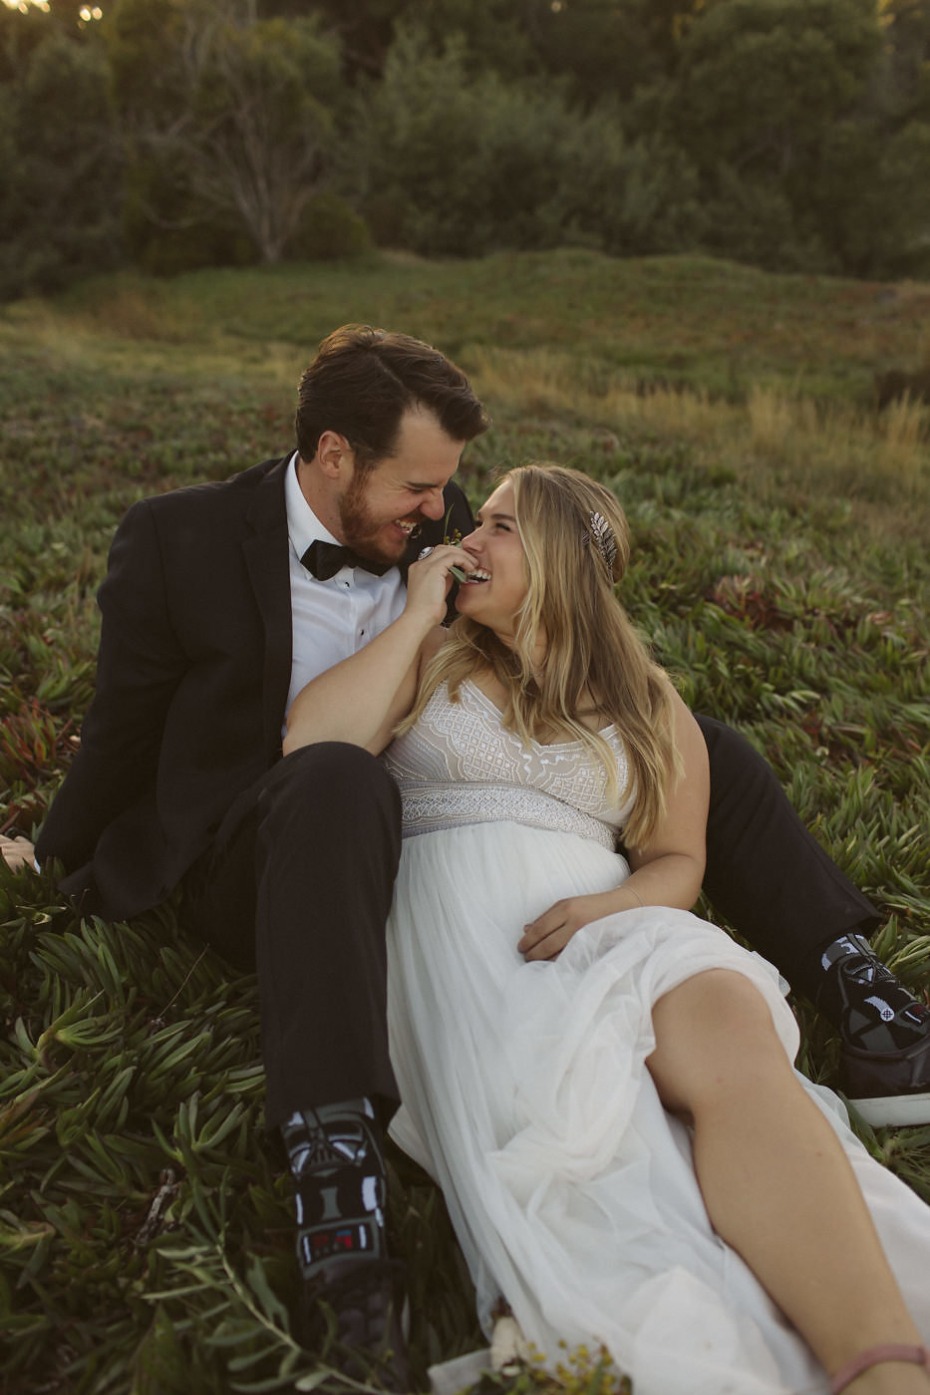 cute and candid wedding photo style